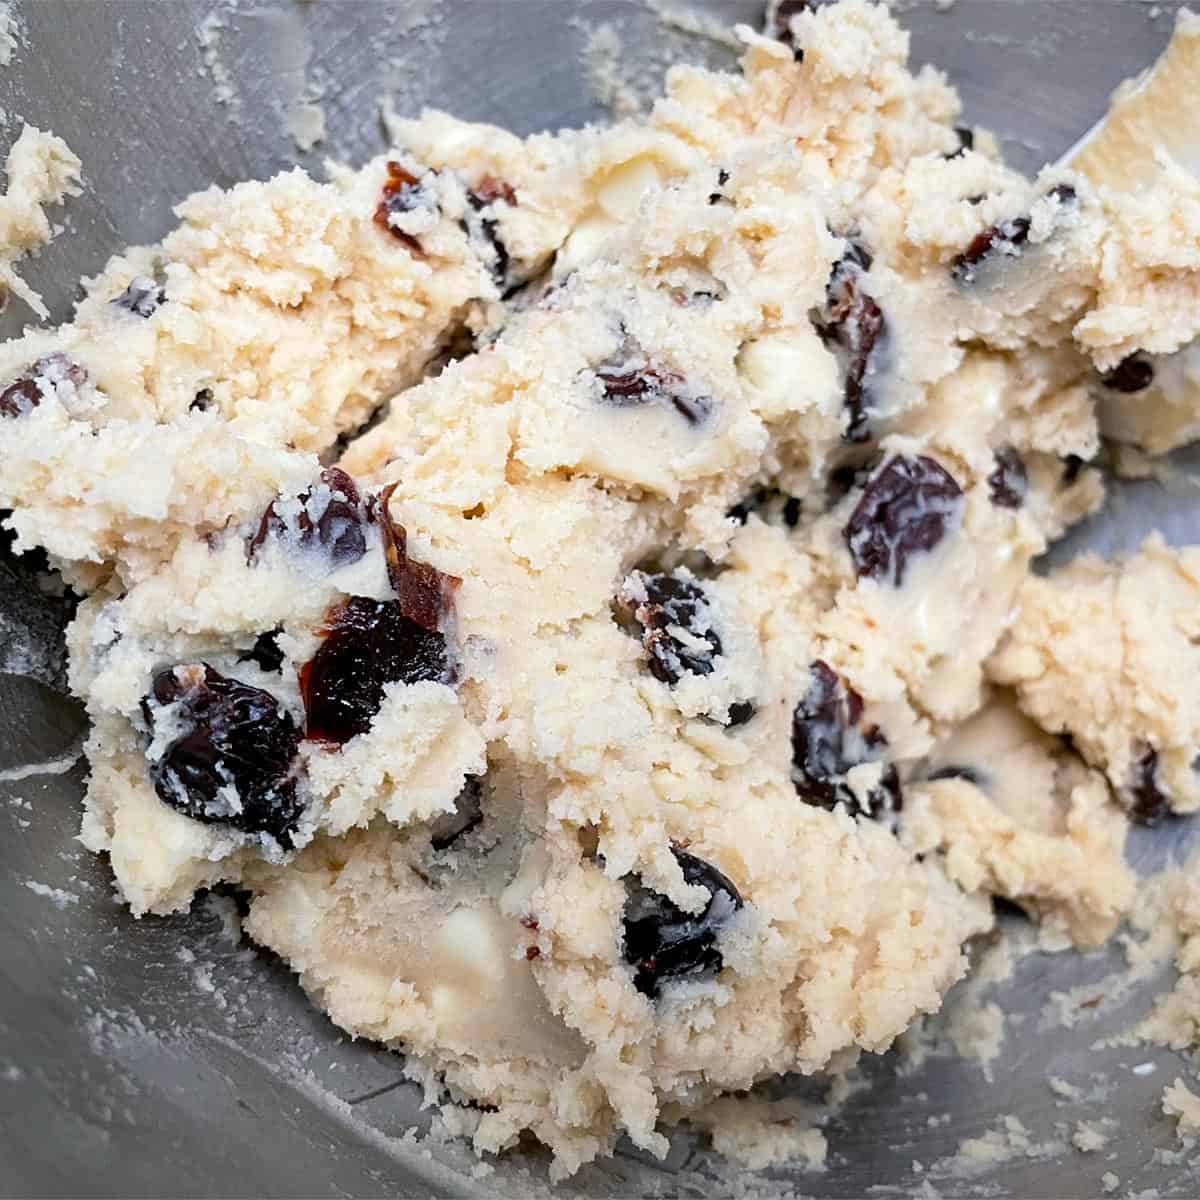 All ingredients mixed together in a mixer bowl for the sweet cherries and white chocolate cookies.